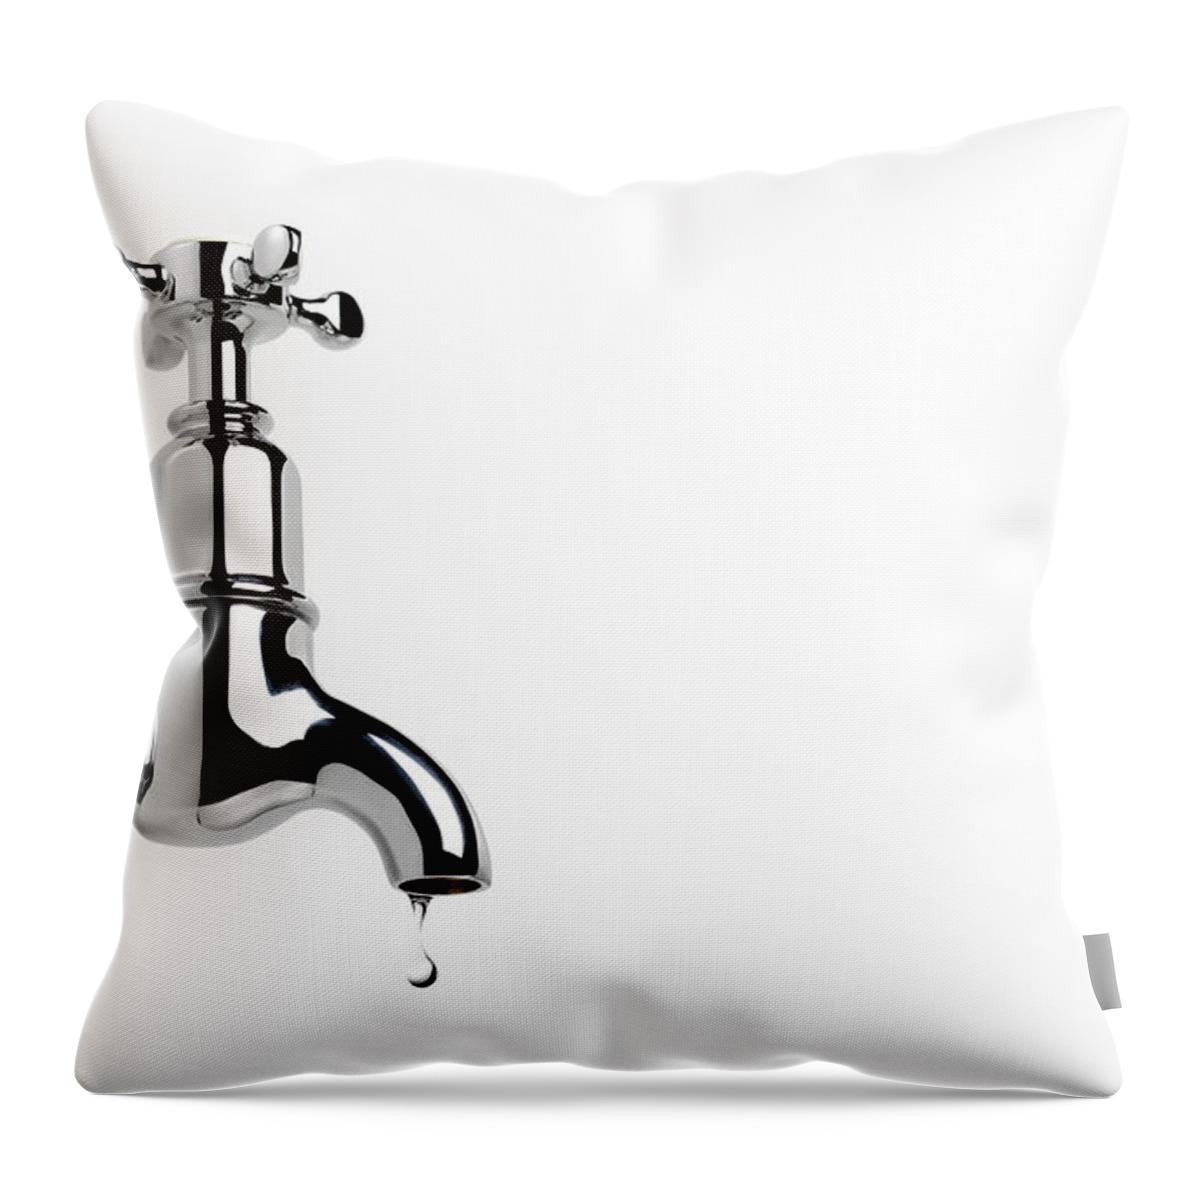 Environmental Conservation Throw Pillow featuring the photograph Dripping Tap With Copy Space by Peter Dazeley